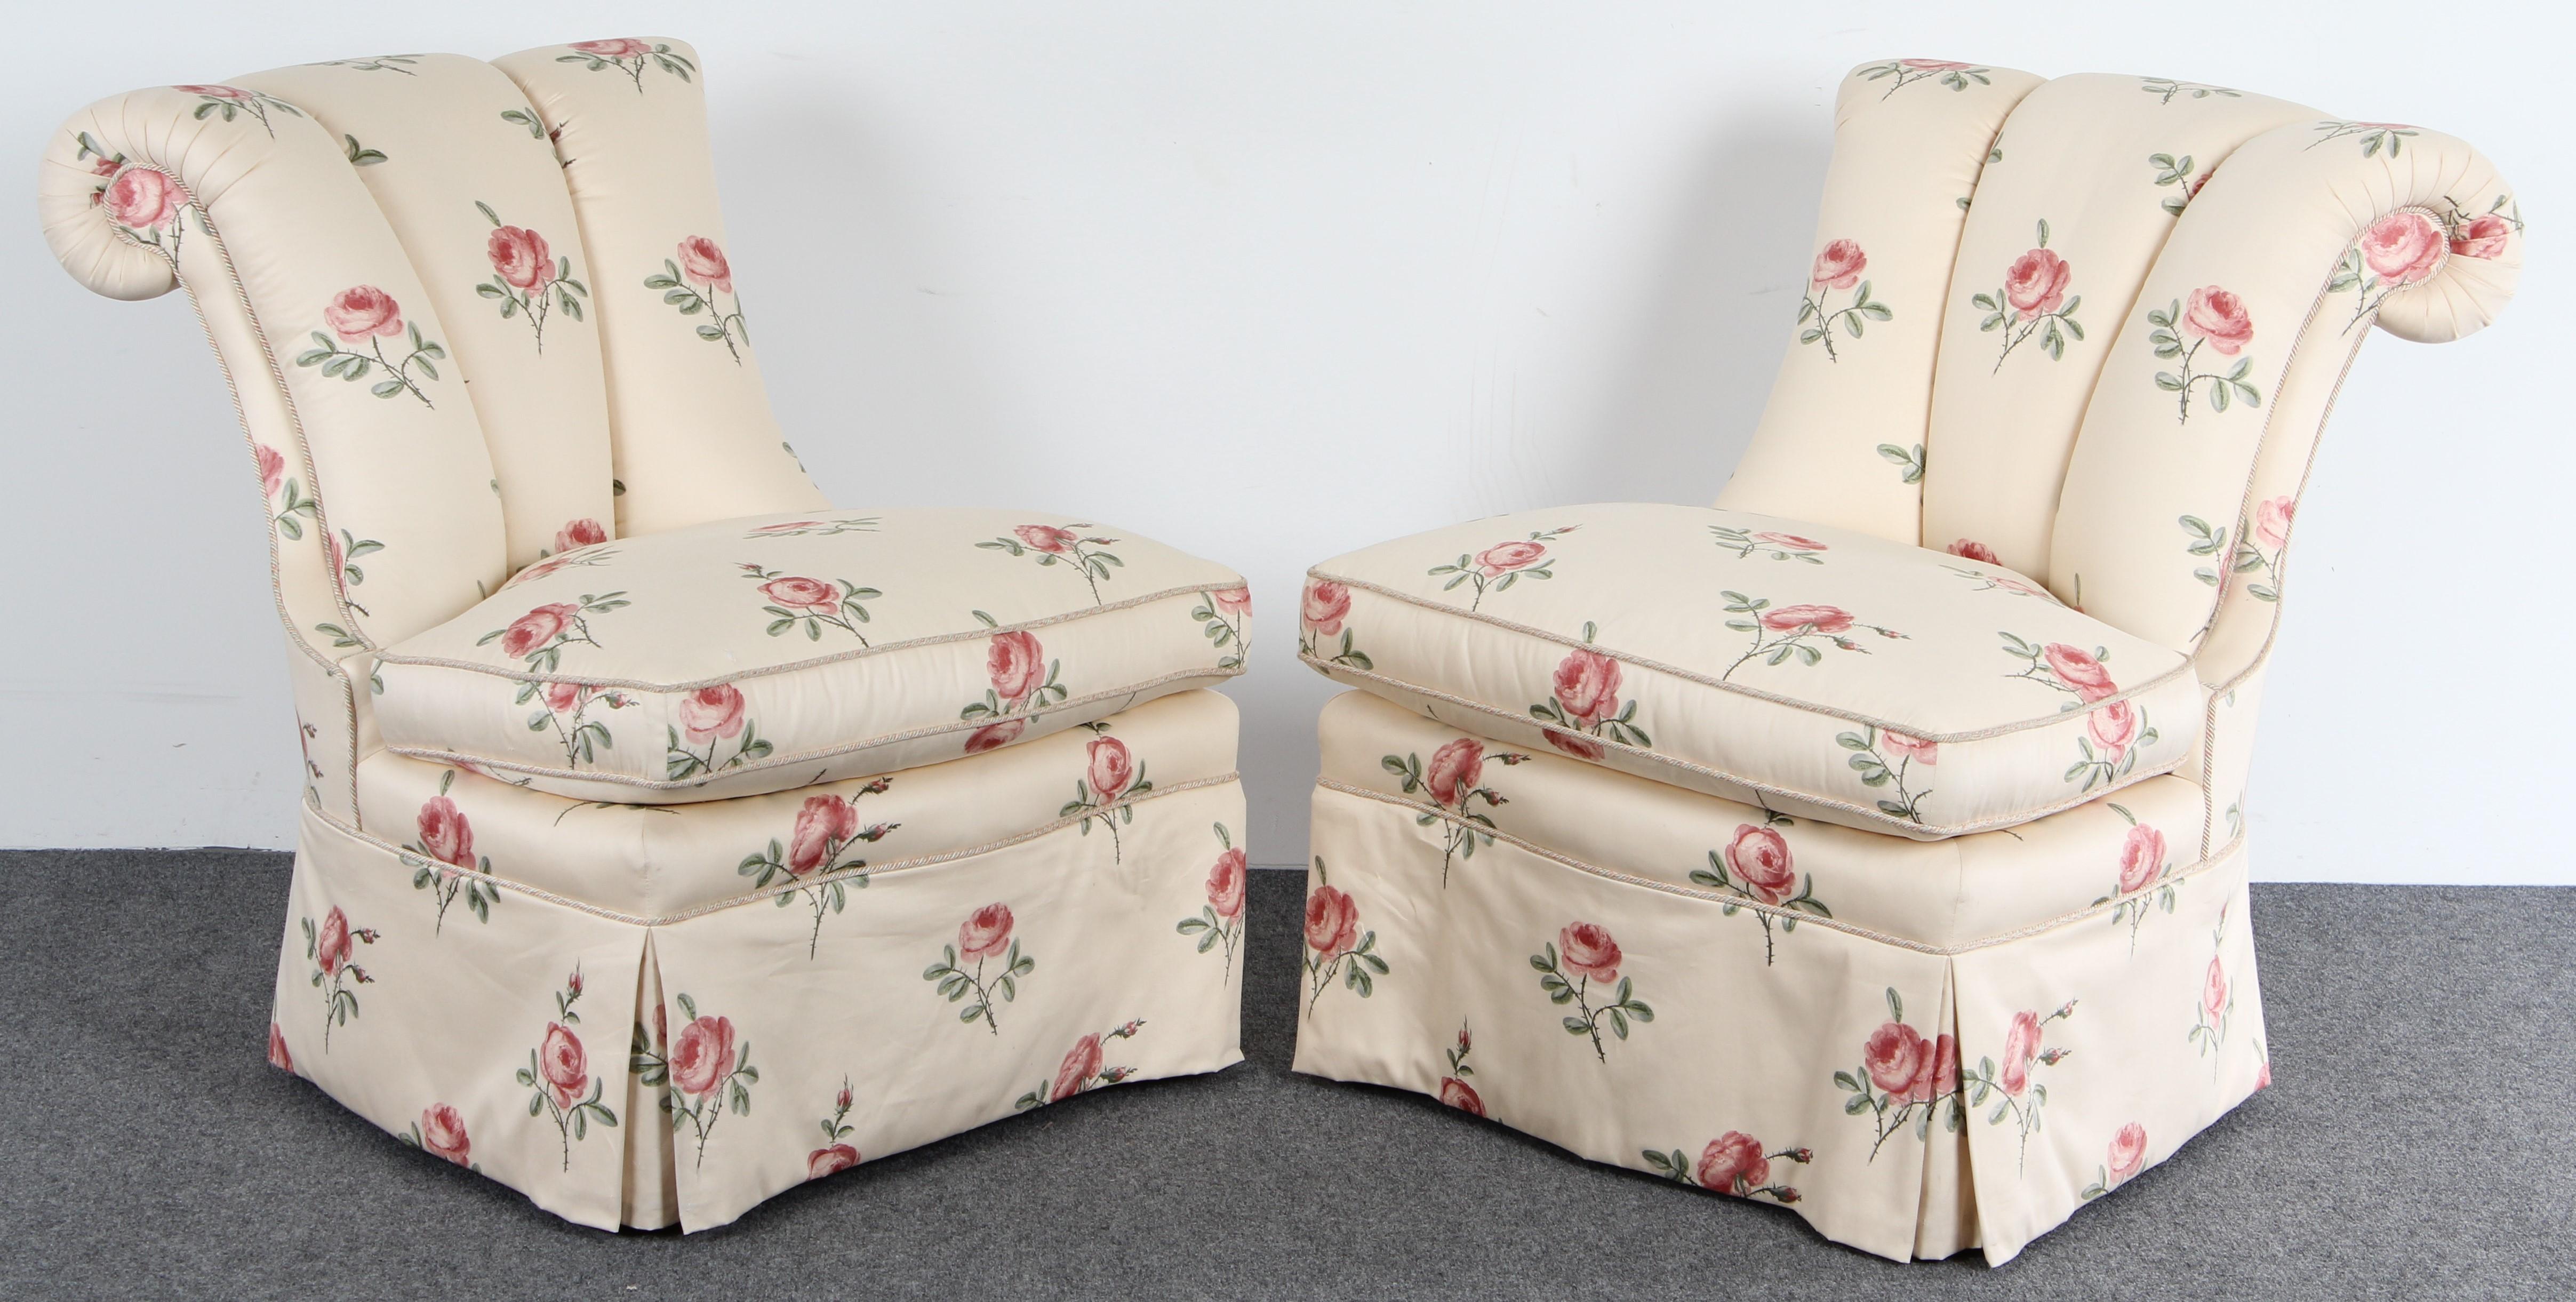 Pair of armless Napoleon III slipper chairs by Lewis Mittman, Inc. The high-quality chairs have original floral chintz upholstery. These comfortable Hollywood Regency style chairs would look great in any modern or traditional home. They have great